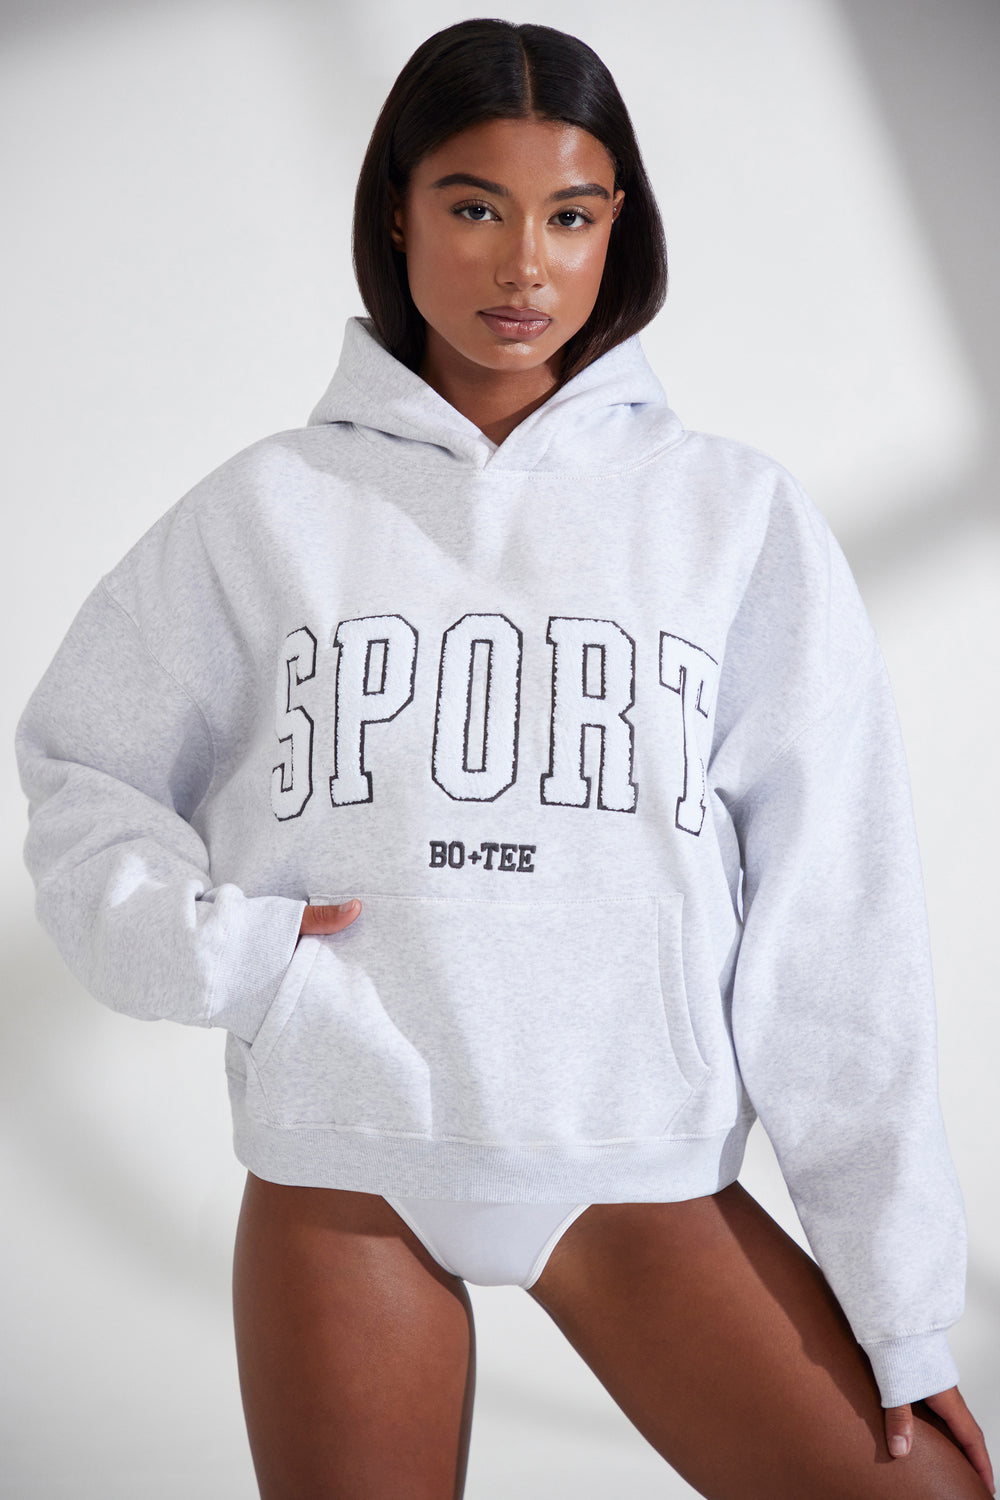 Express Yourself Hoodie (Large)